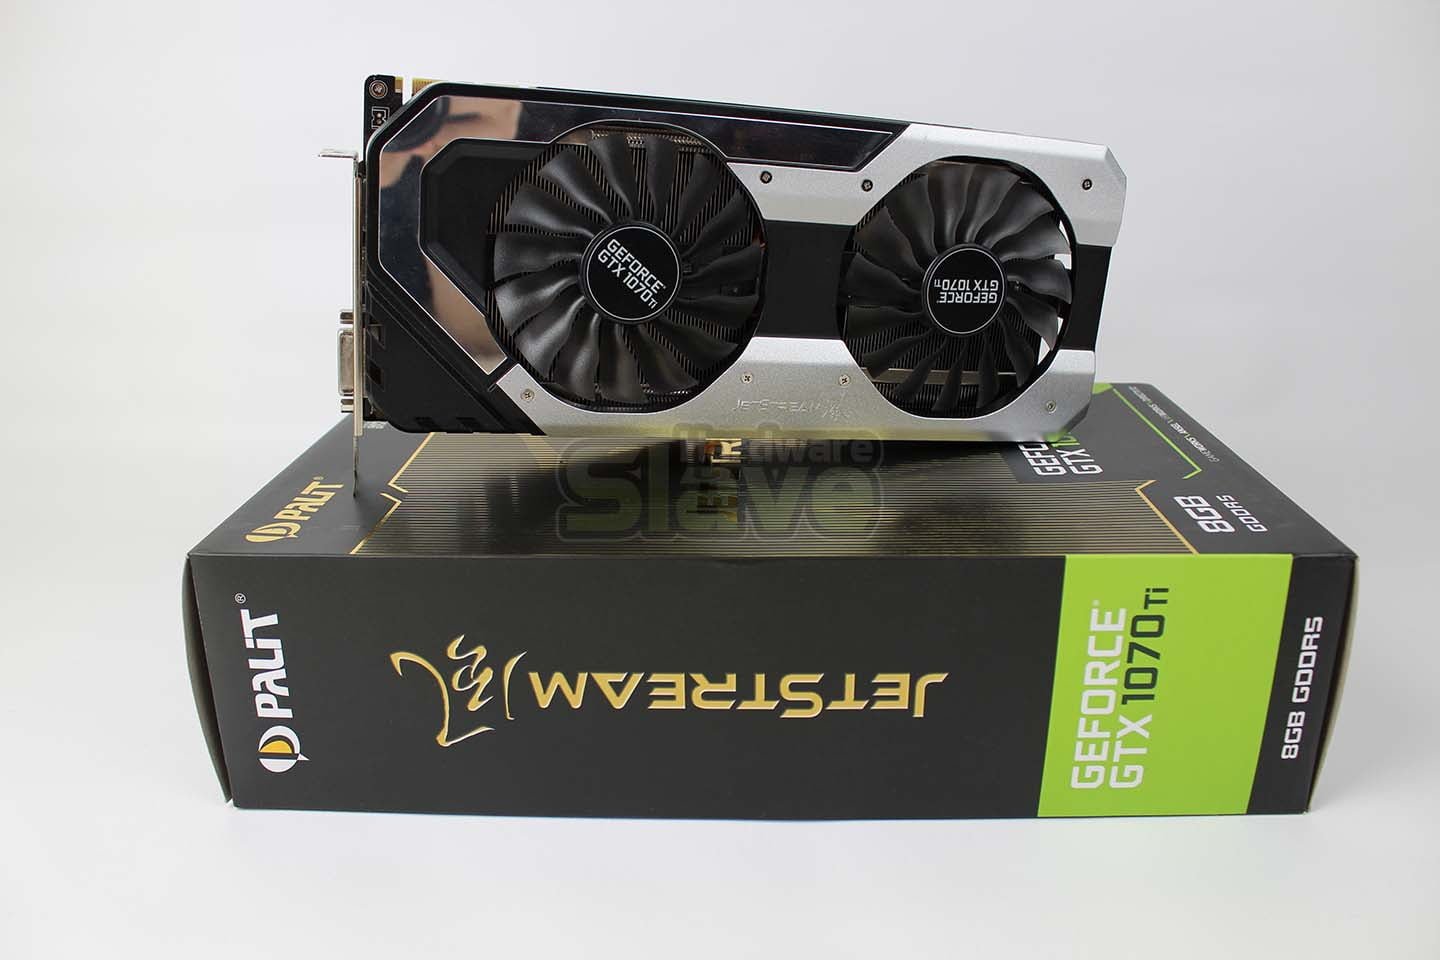 Palit GeForce GTX 1070 Ti JetStream Graphics Card Review – Page 9